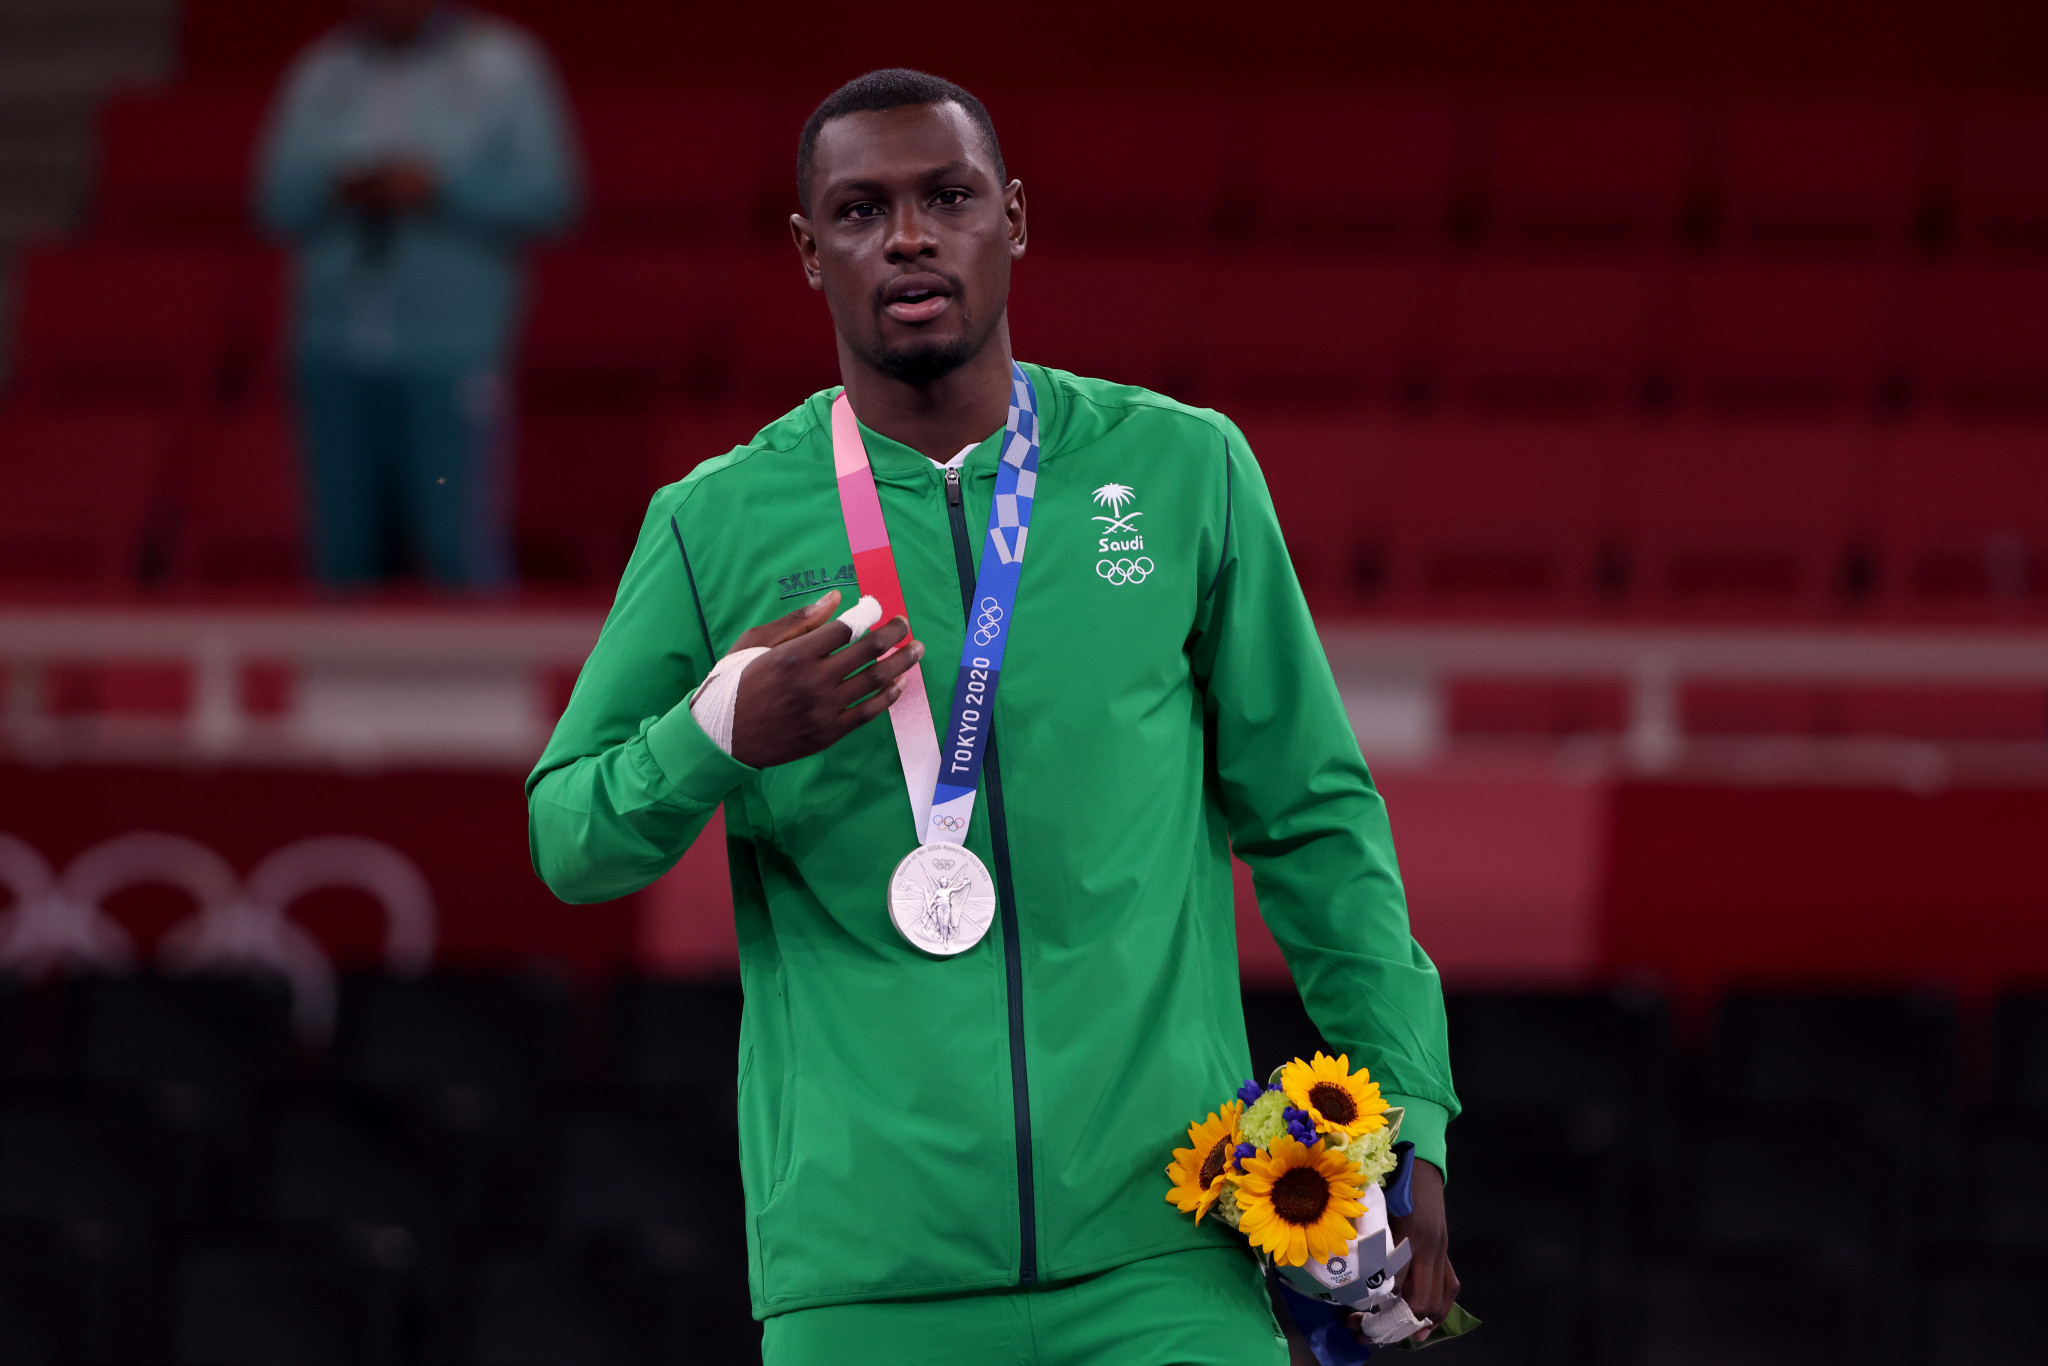 Olympic silver medallist Tareg Hamedi clinched gold for Saudi Arabia in the men's over-84kg kumite event in Almaty ©Getty Images